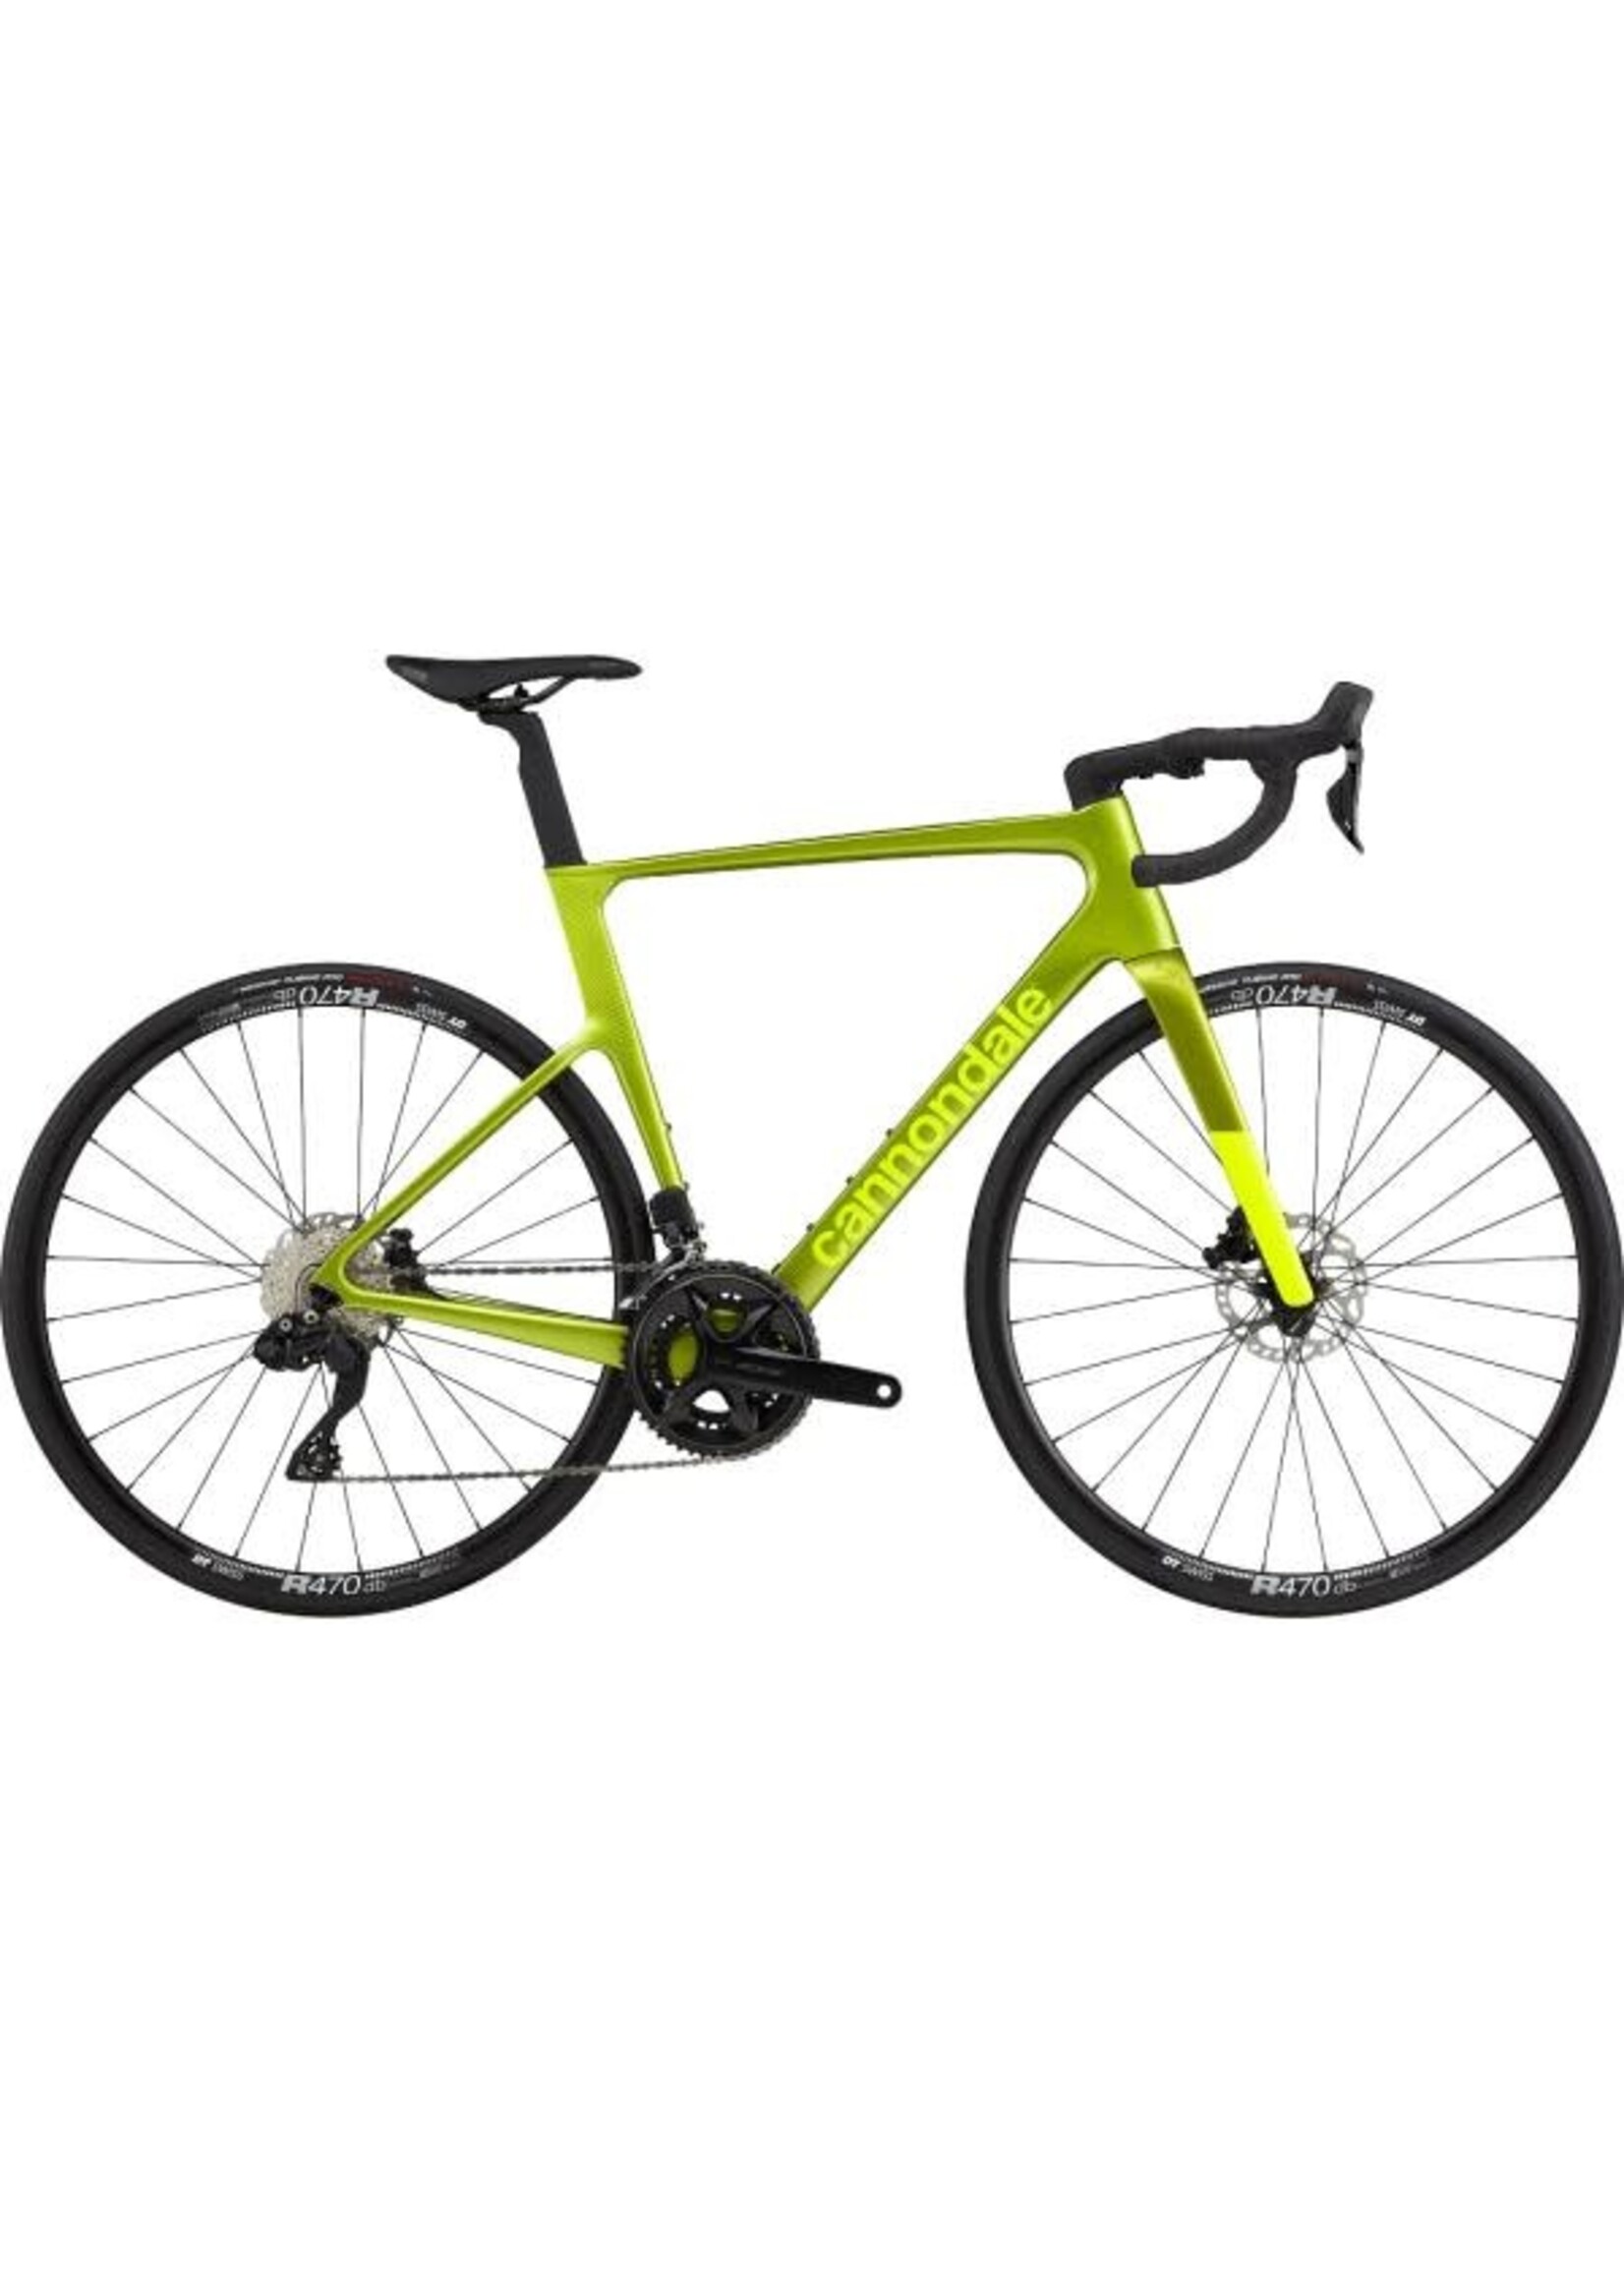 Cannondale Cannondale 700 U S6 EVO Crb 3 VGN 56